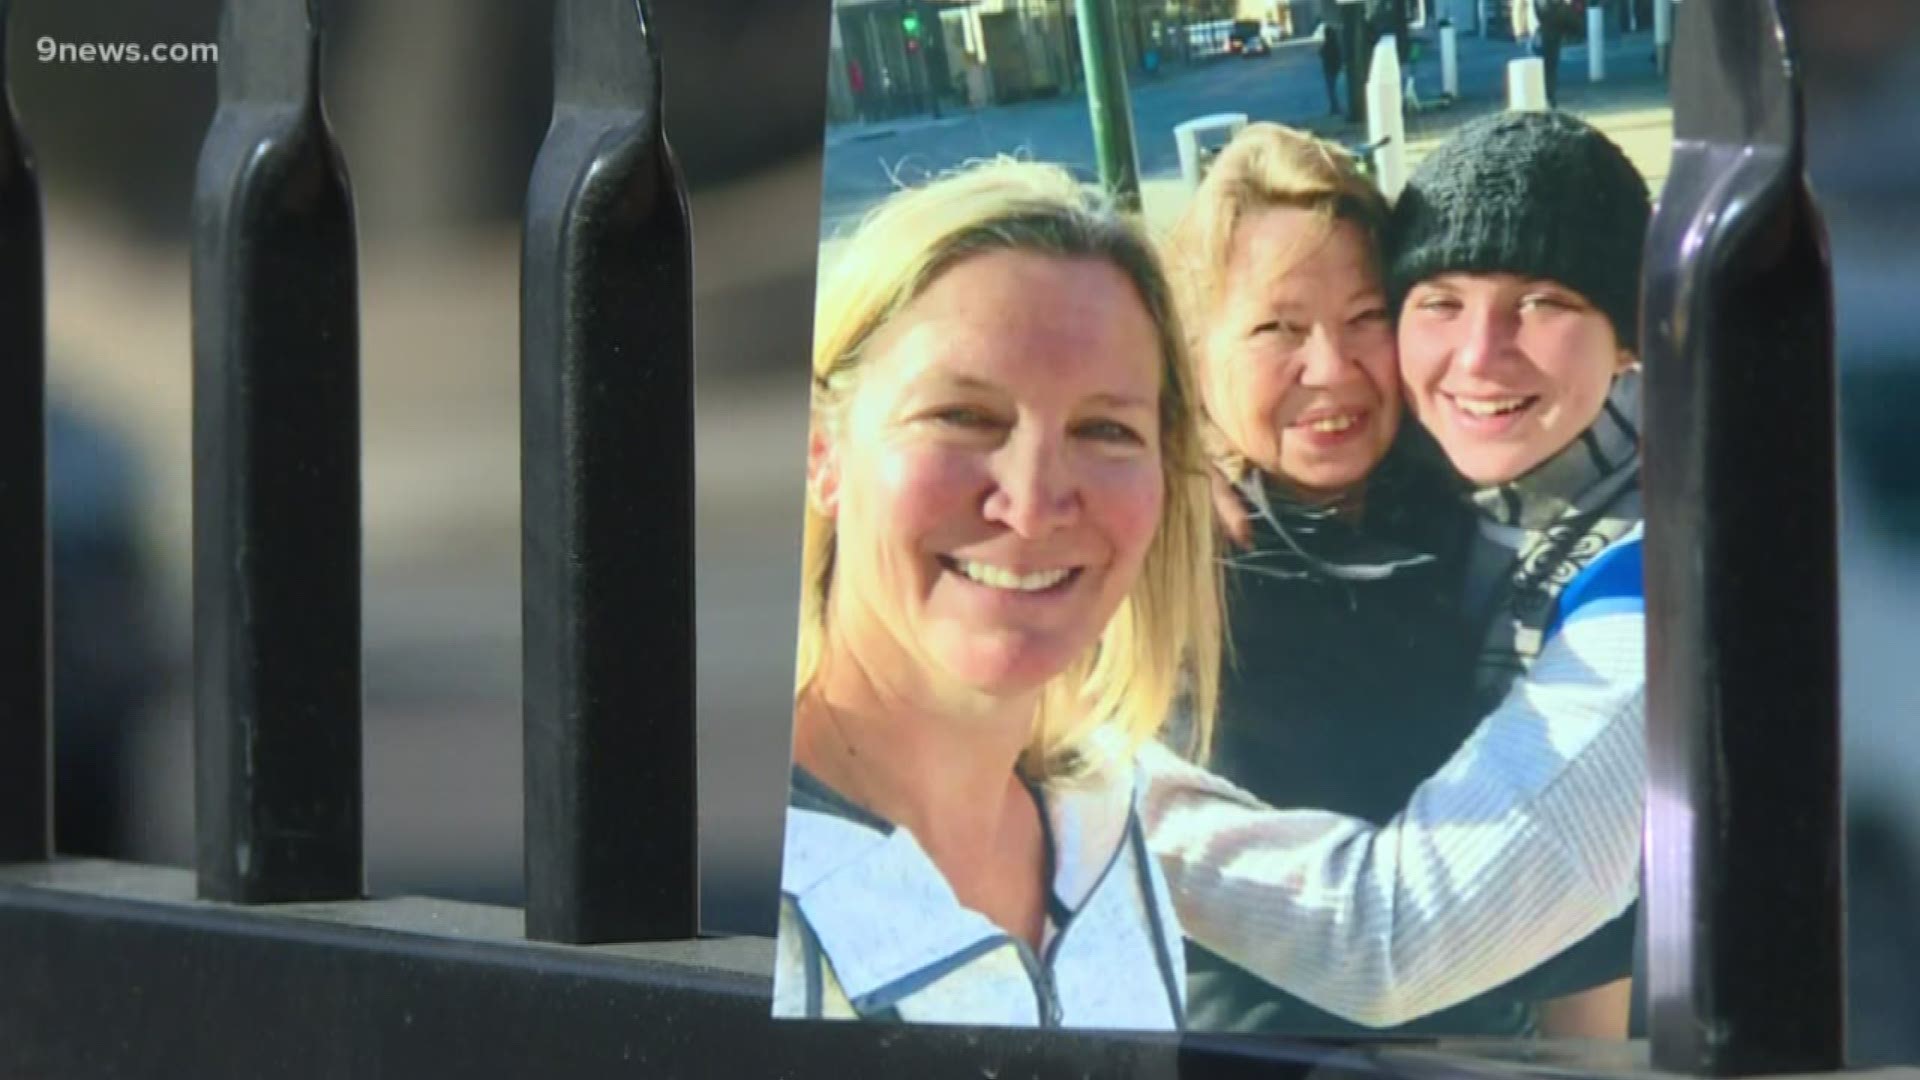 An update to a story 9NEWS told you in November. A North Dakota family continues to search for daughter struggling with addiction and homelessness.